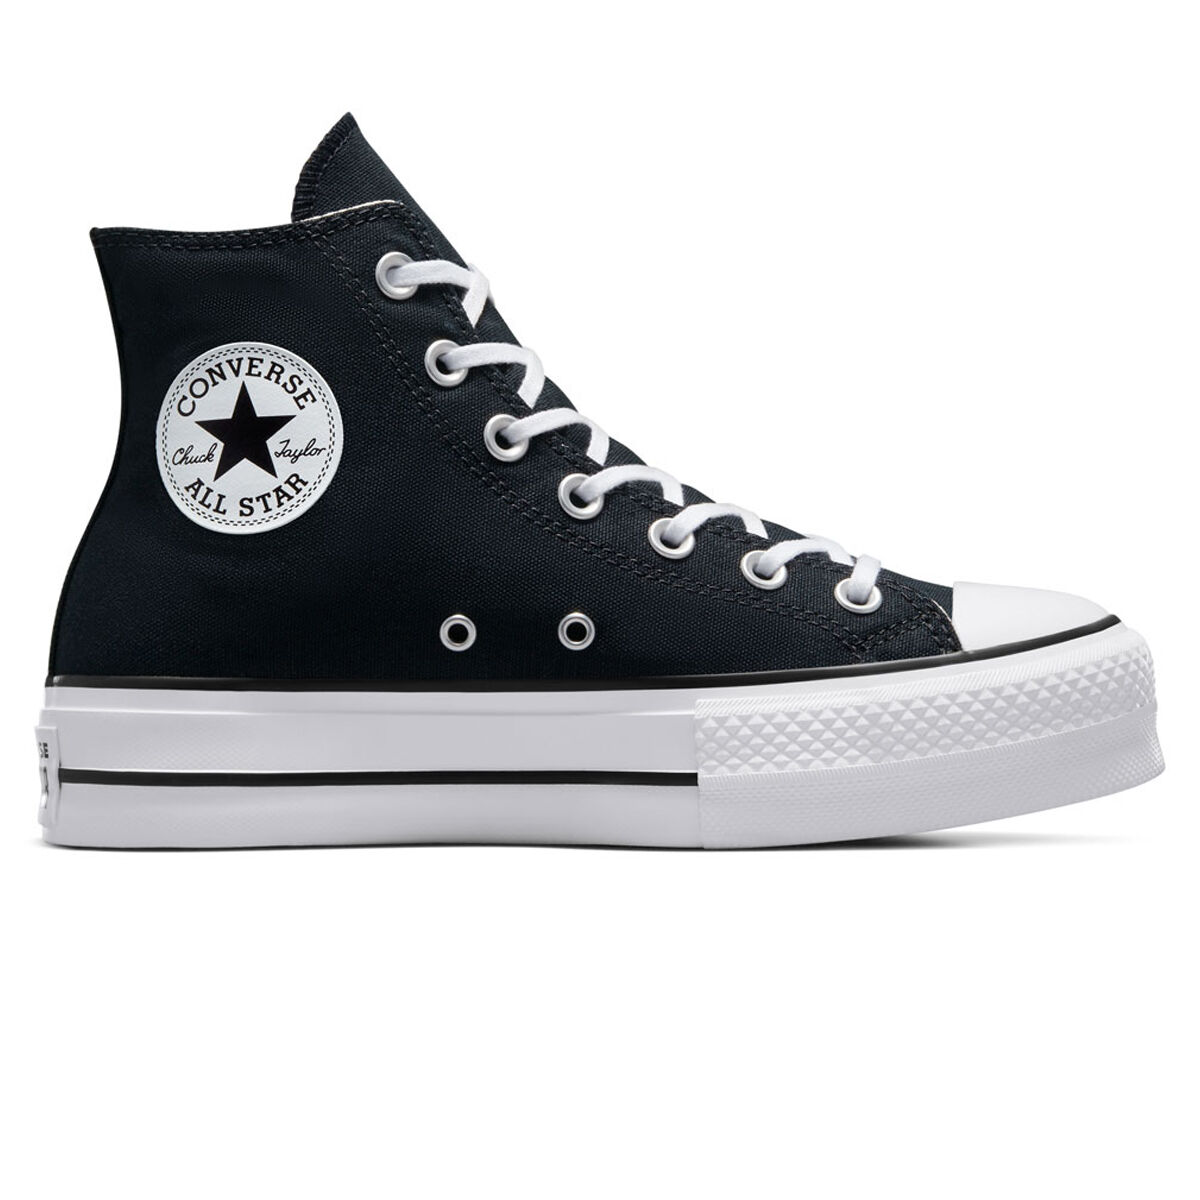 Converse A05347C Chuck 70 De Luxe Heeled Ankle Boot Black White Size US 5 -  10 | eBay